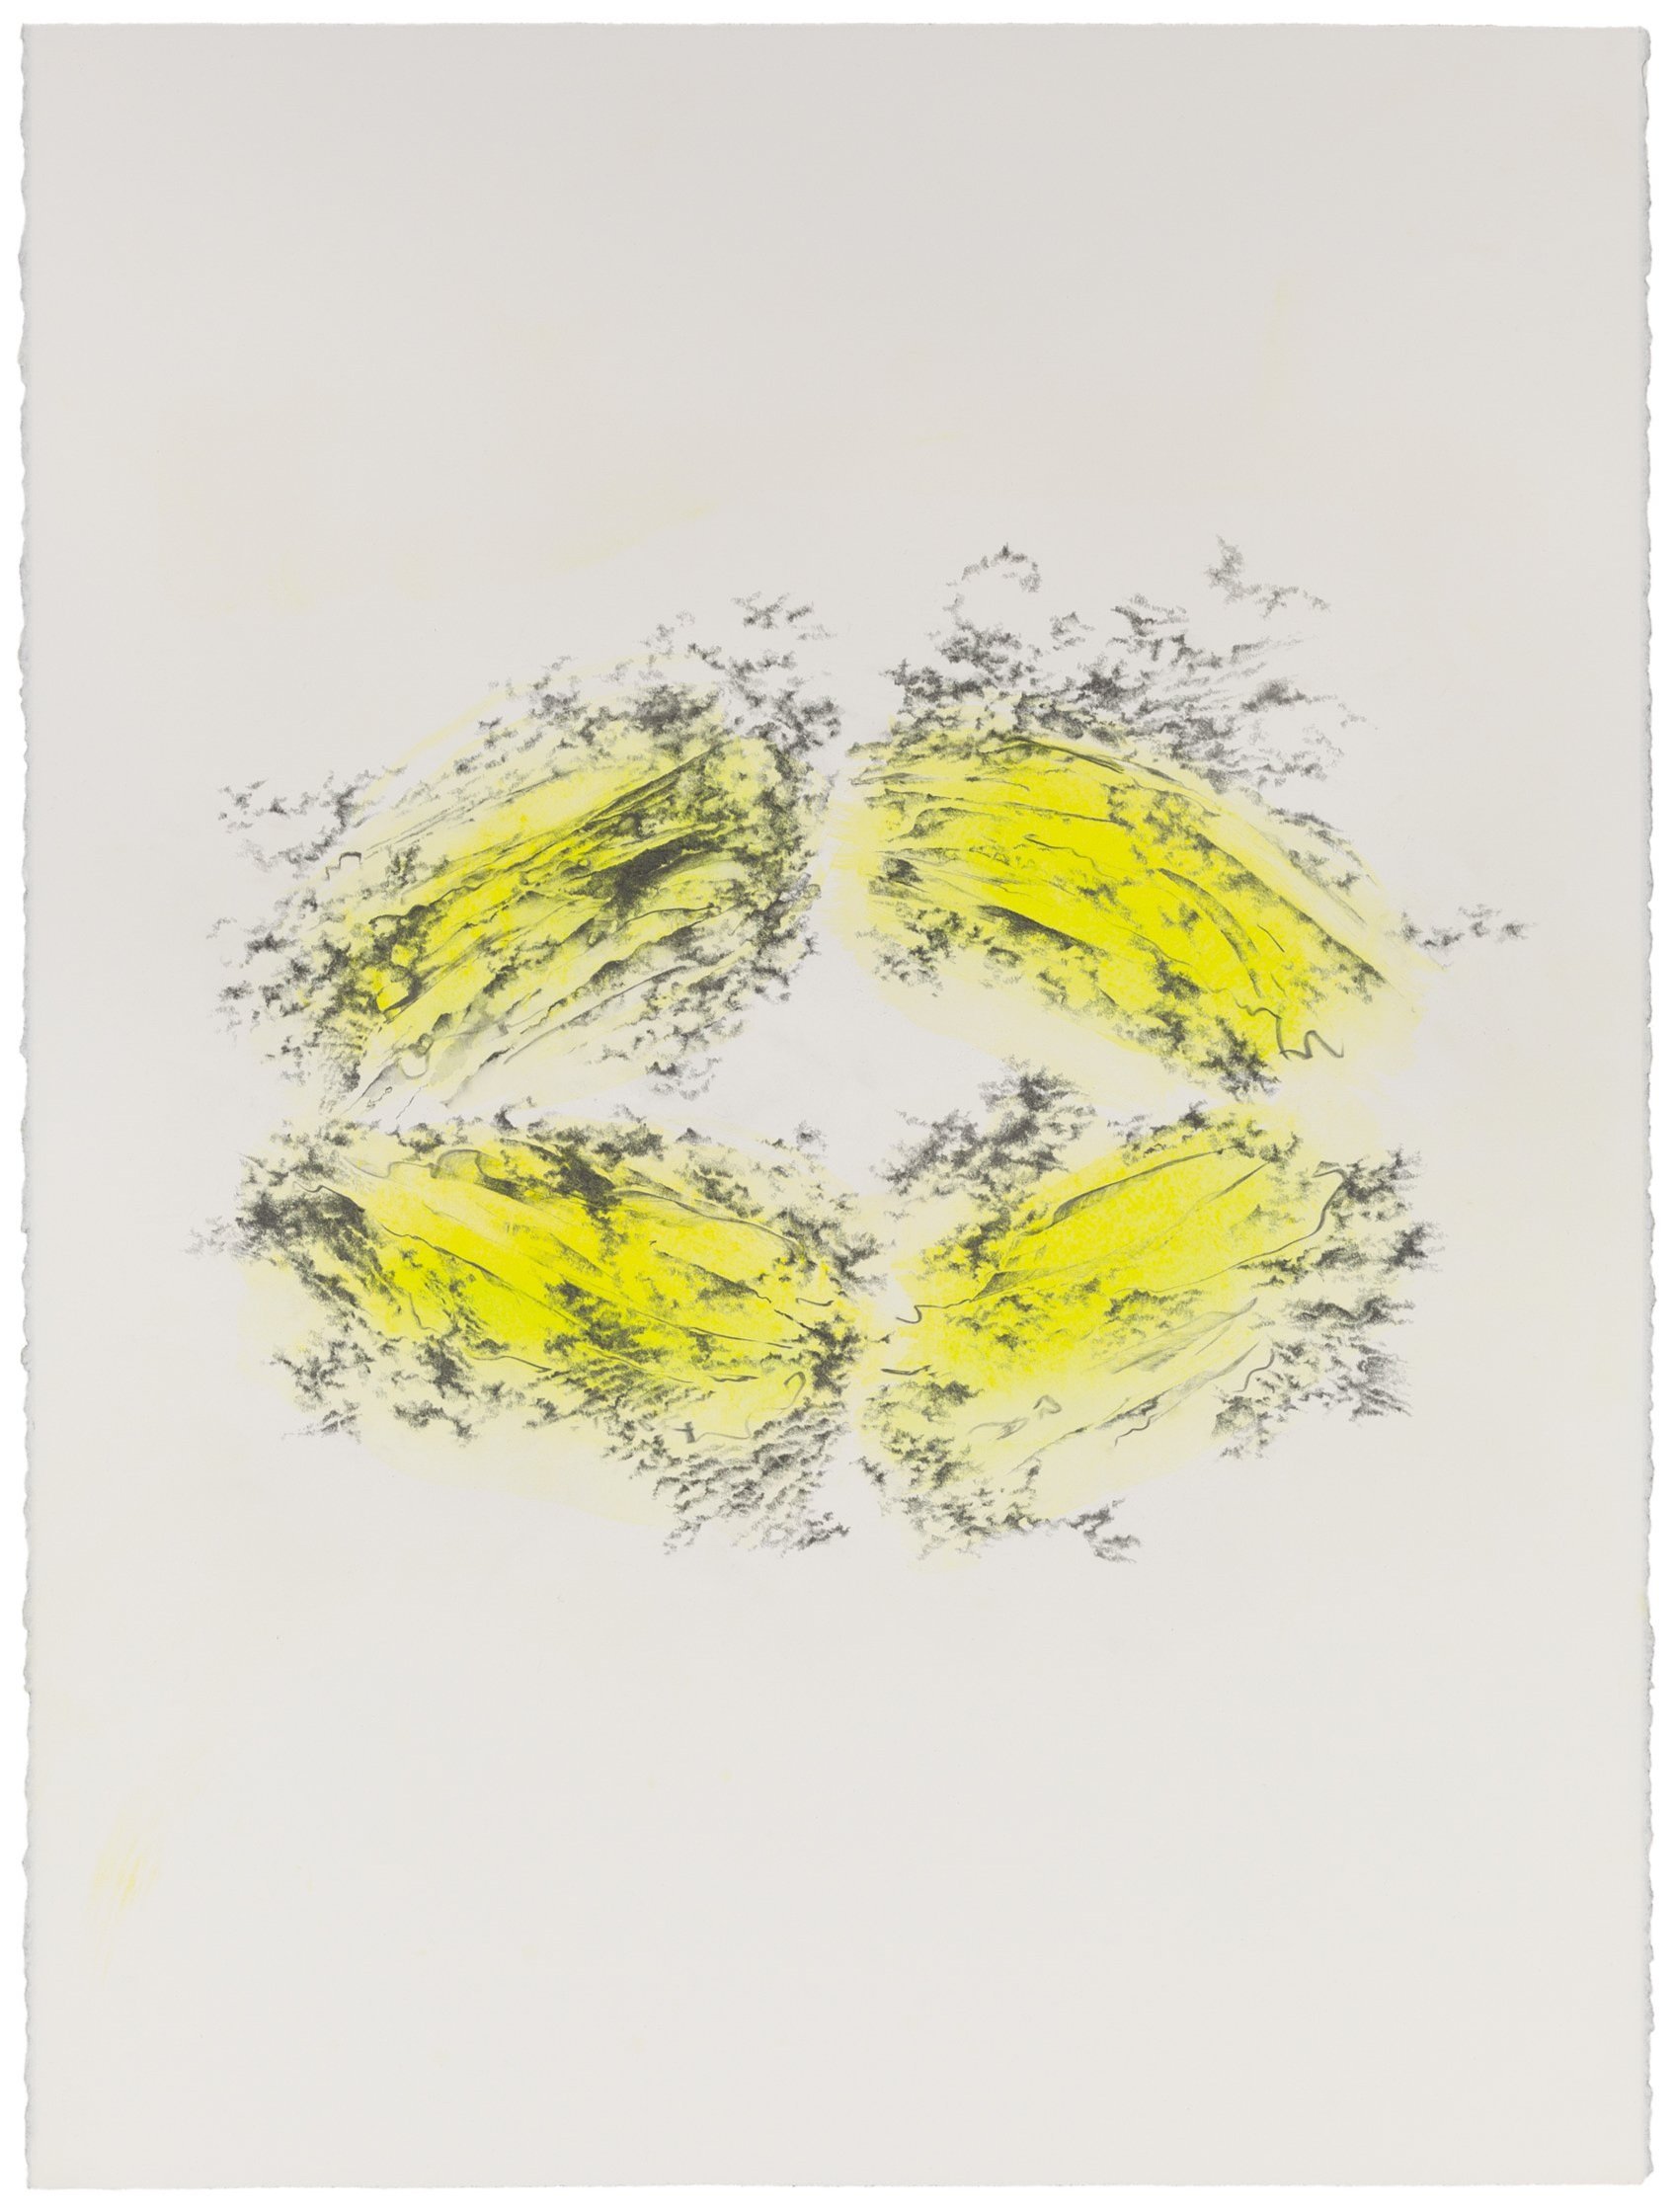   Christine Bourdette   Fumarole 3 , 2021 graphite and, water-soluble colored pencil on paper 35.25 x 27.5" framed&nbsp;  INQUIRE&gt;  